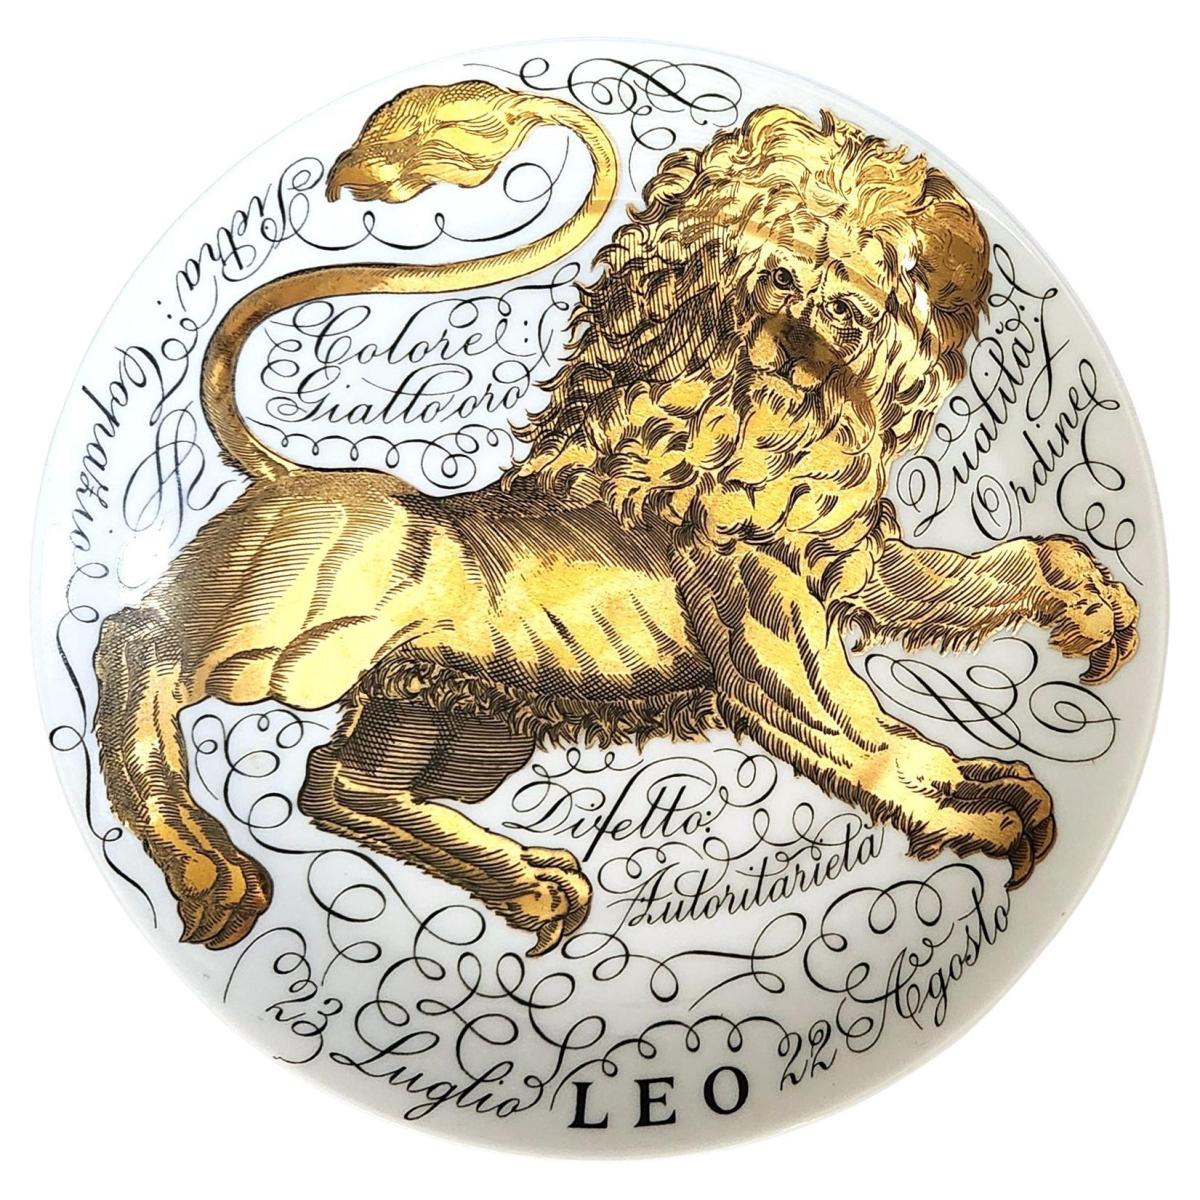 Vintage Piero Fornasetti Porcelain Zodiac Plate, Astrological Sign Leo, Astrali Pattern, Made for Corisia, Dated 1965, No 2.